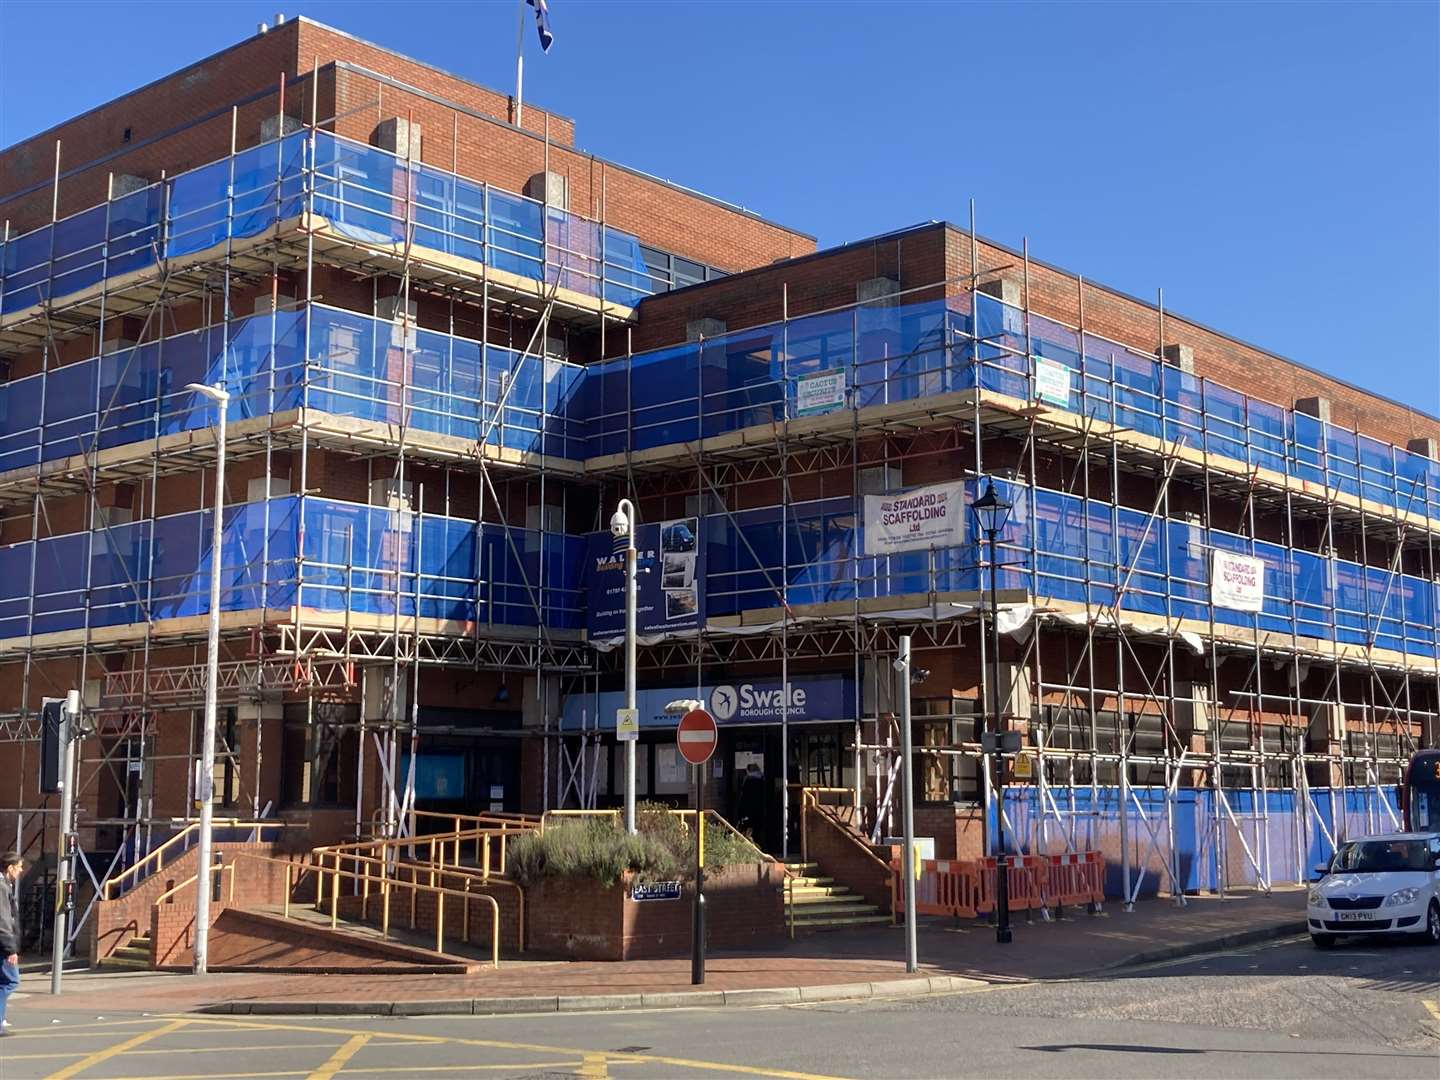 Swale House in East Street, Sittingbourne, with scaffolding during its £1.9m refurbishment